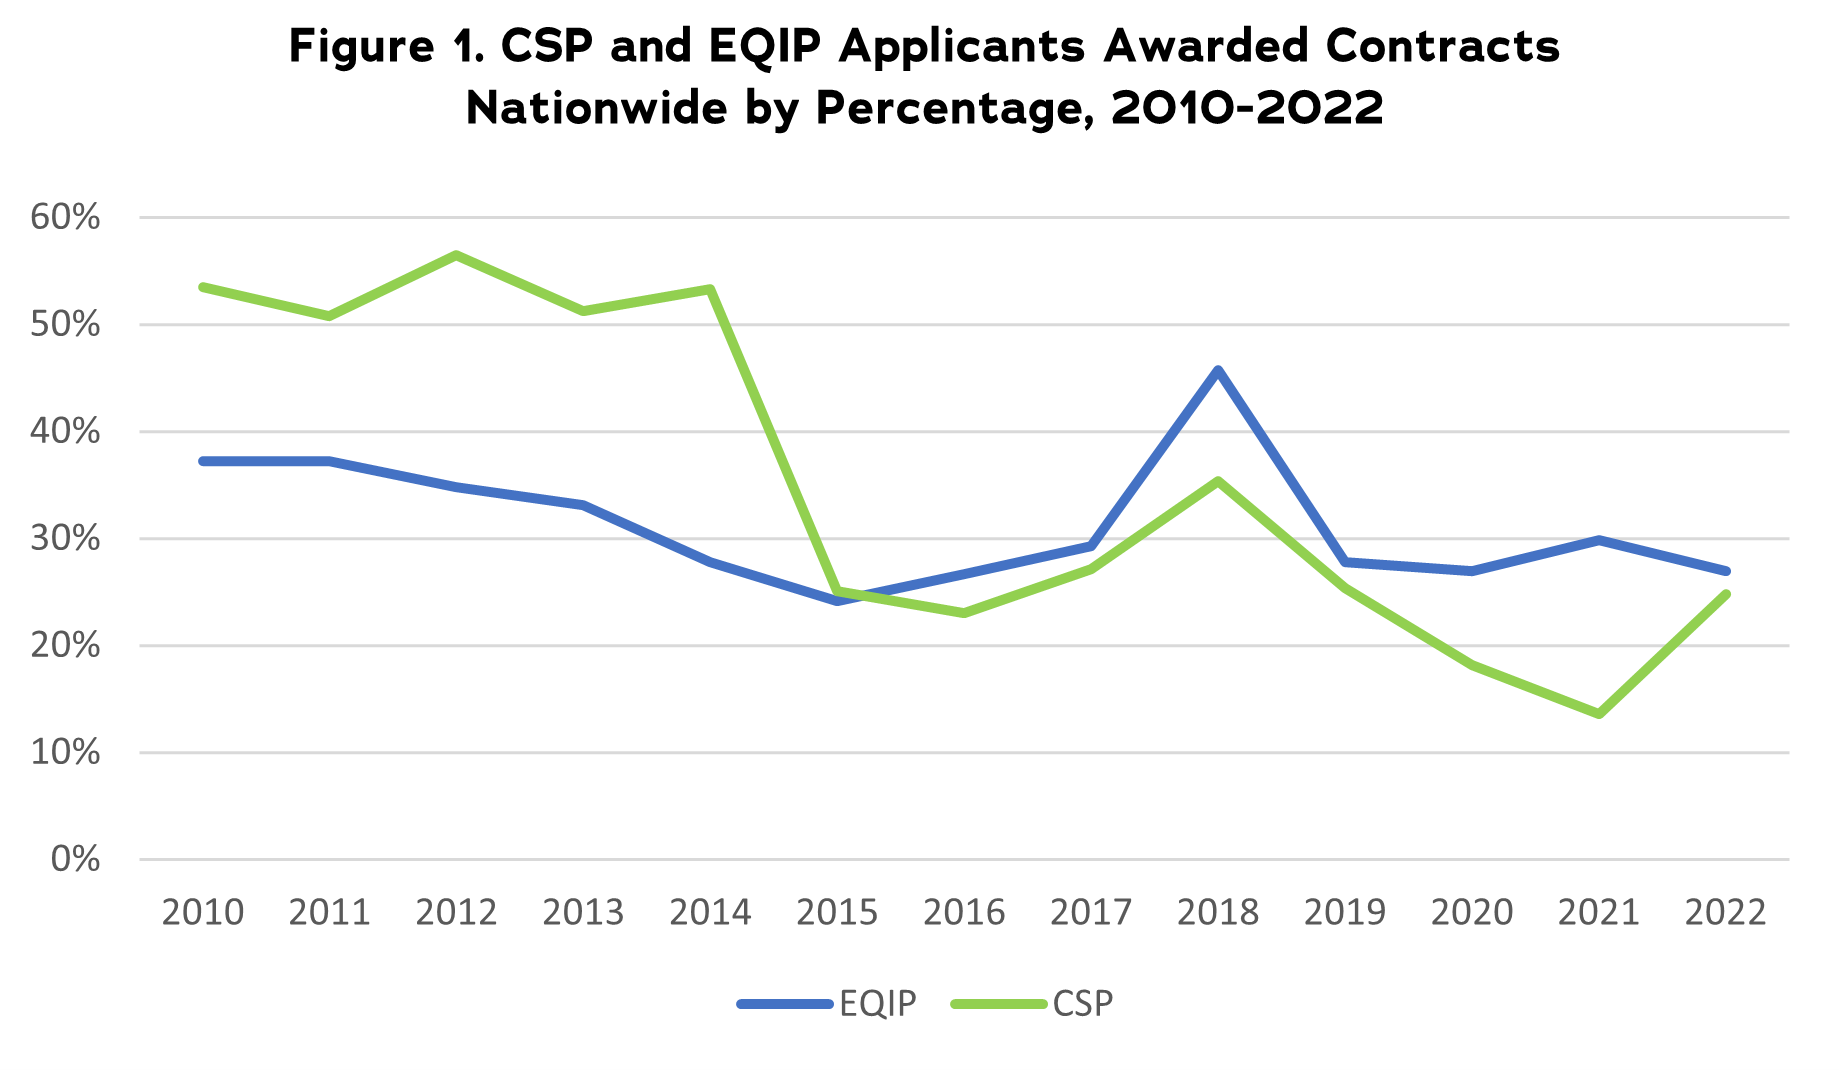 Graph showing trends in EQIP and CSP contracts awarded from 2010 to 2022